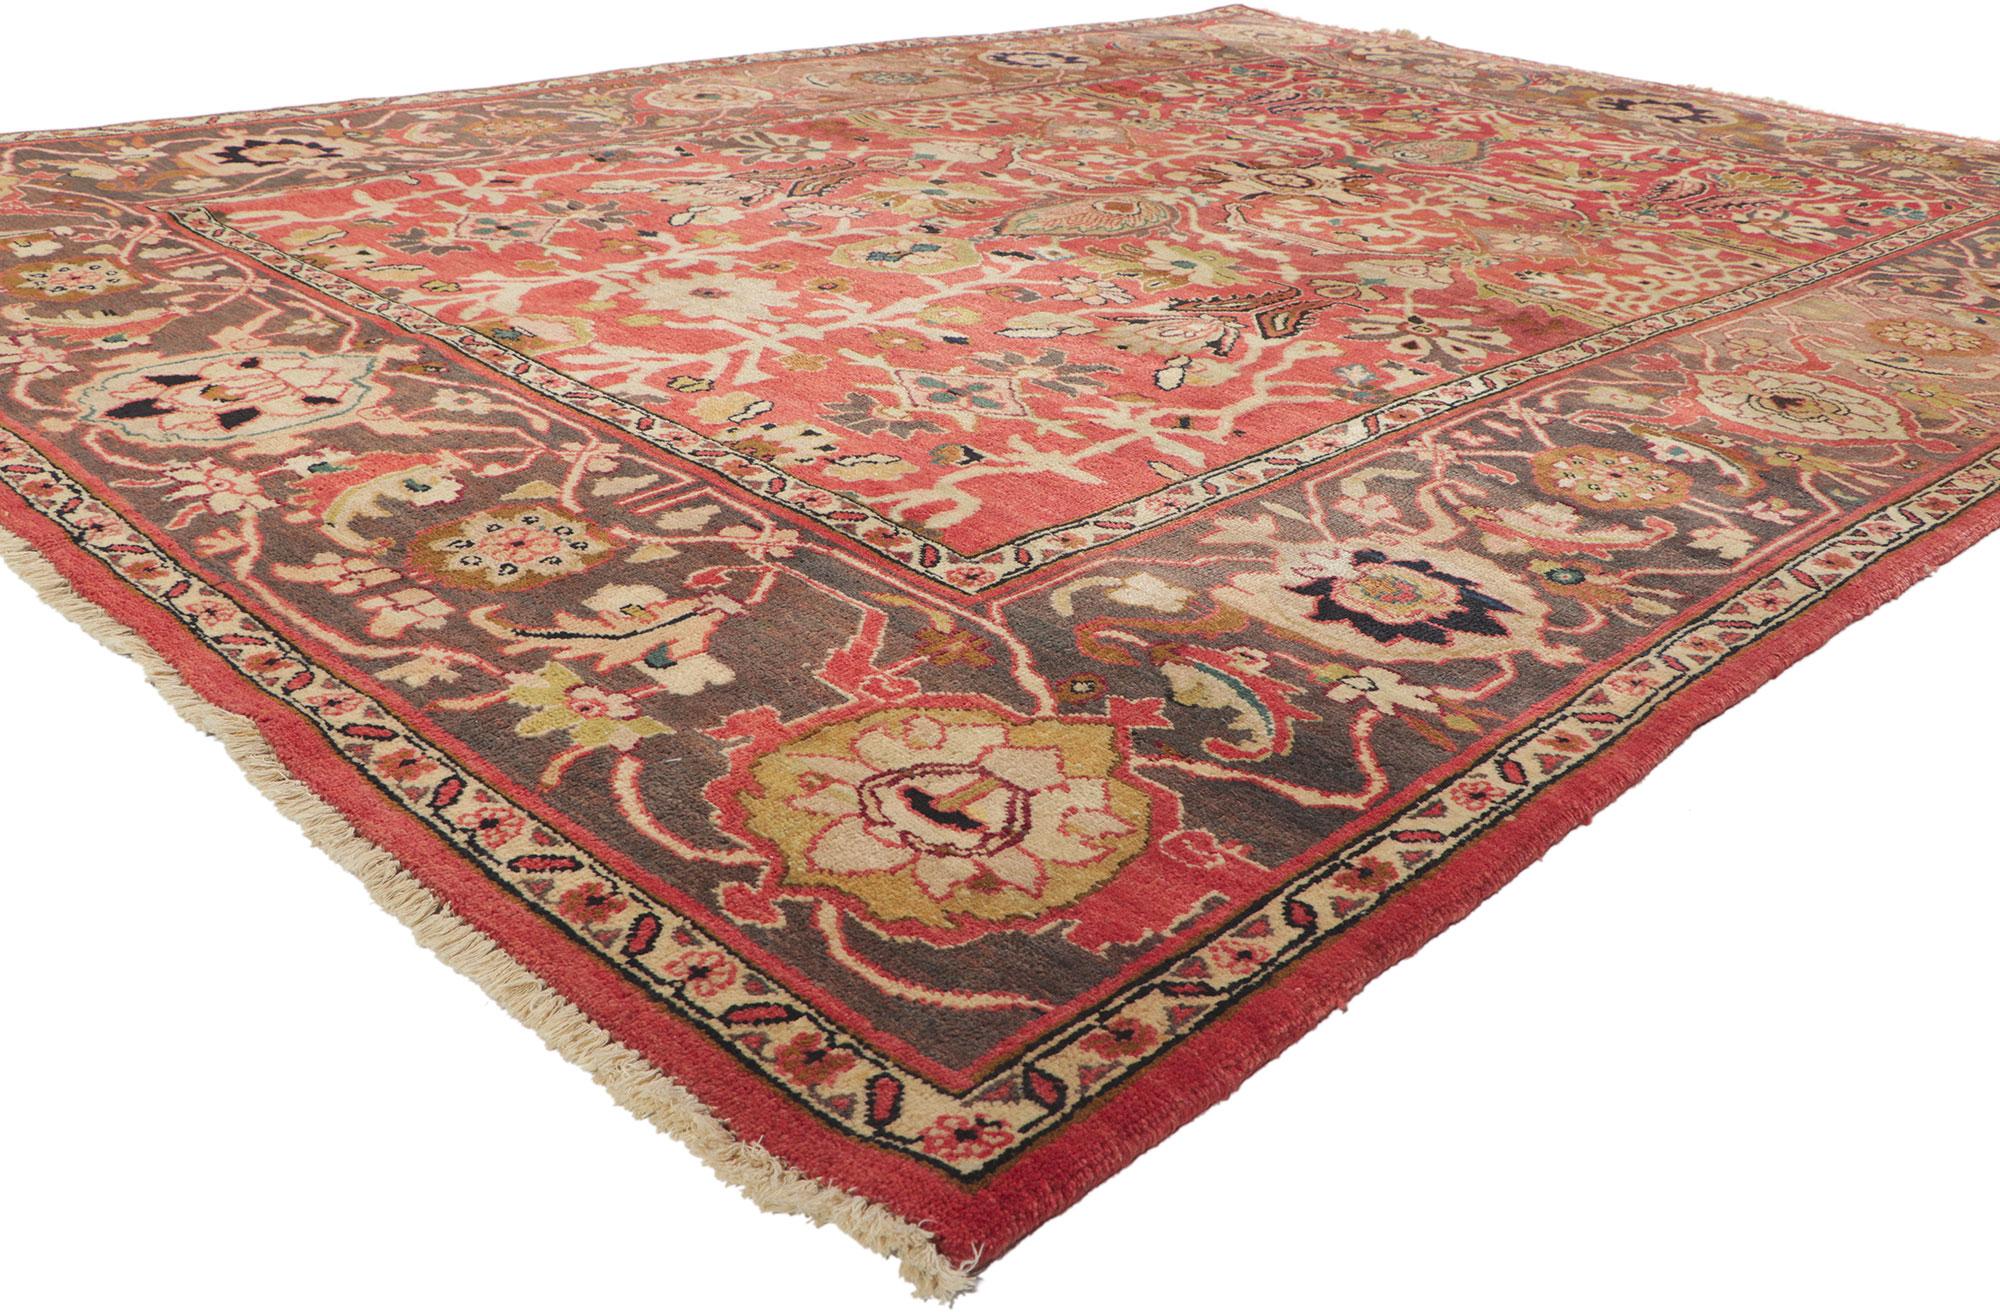 76882 Vintage Indian Mahal Rug, 07'08 x 10'04.
This hand-knotted wool vintage Indian rug features an all-over geometric pattern surrounded by a Classic border creating a well-balanced and timeless design. This vintage Indian area rug brings a